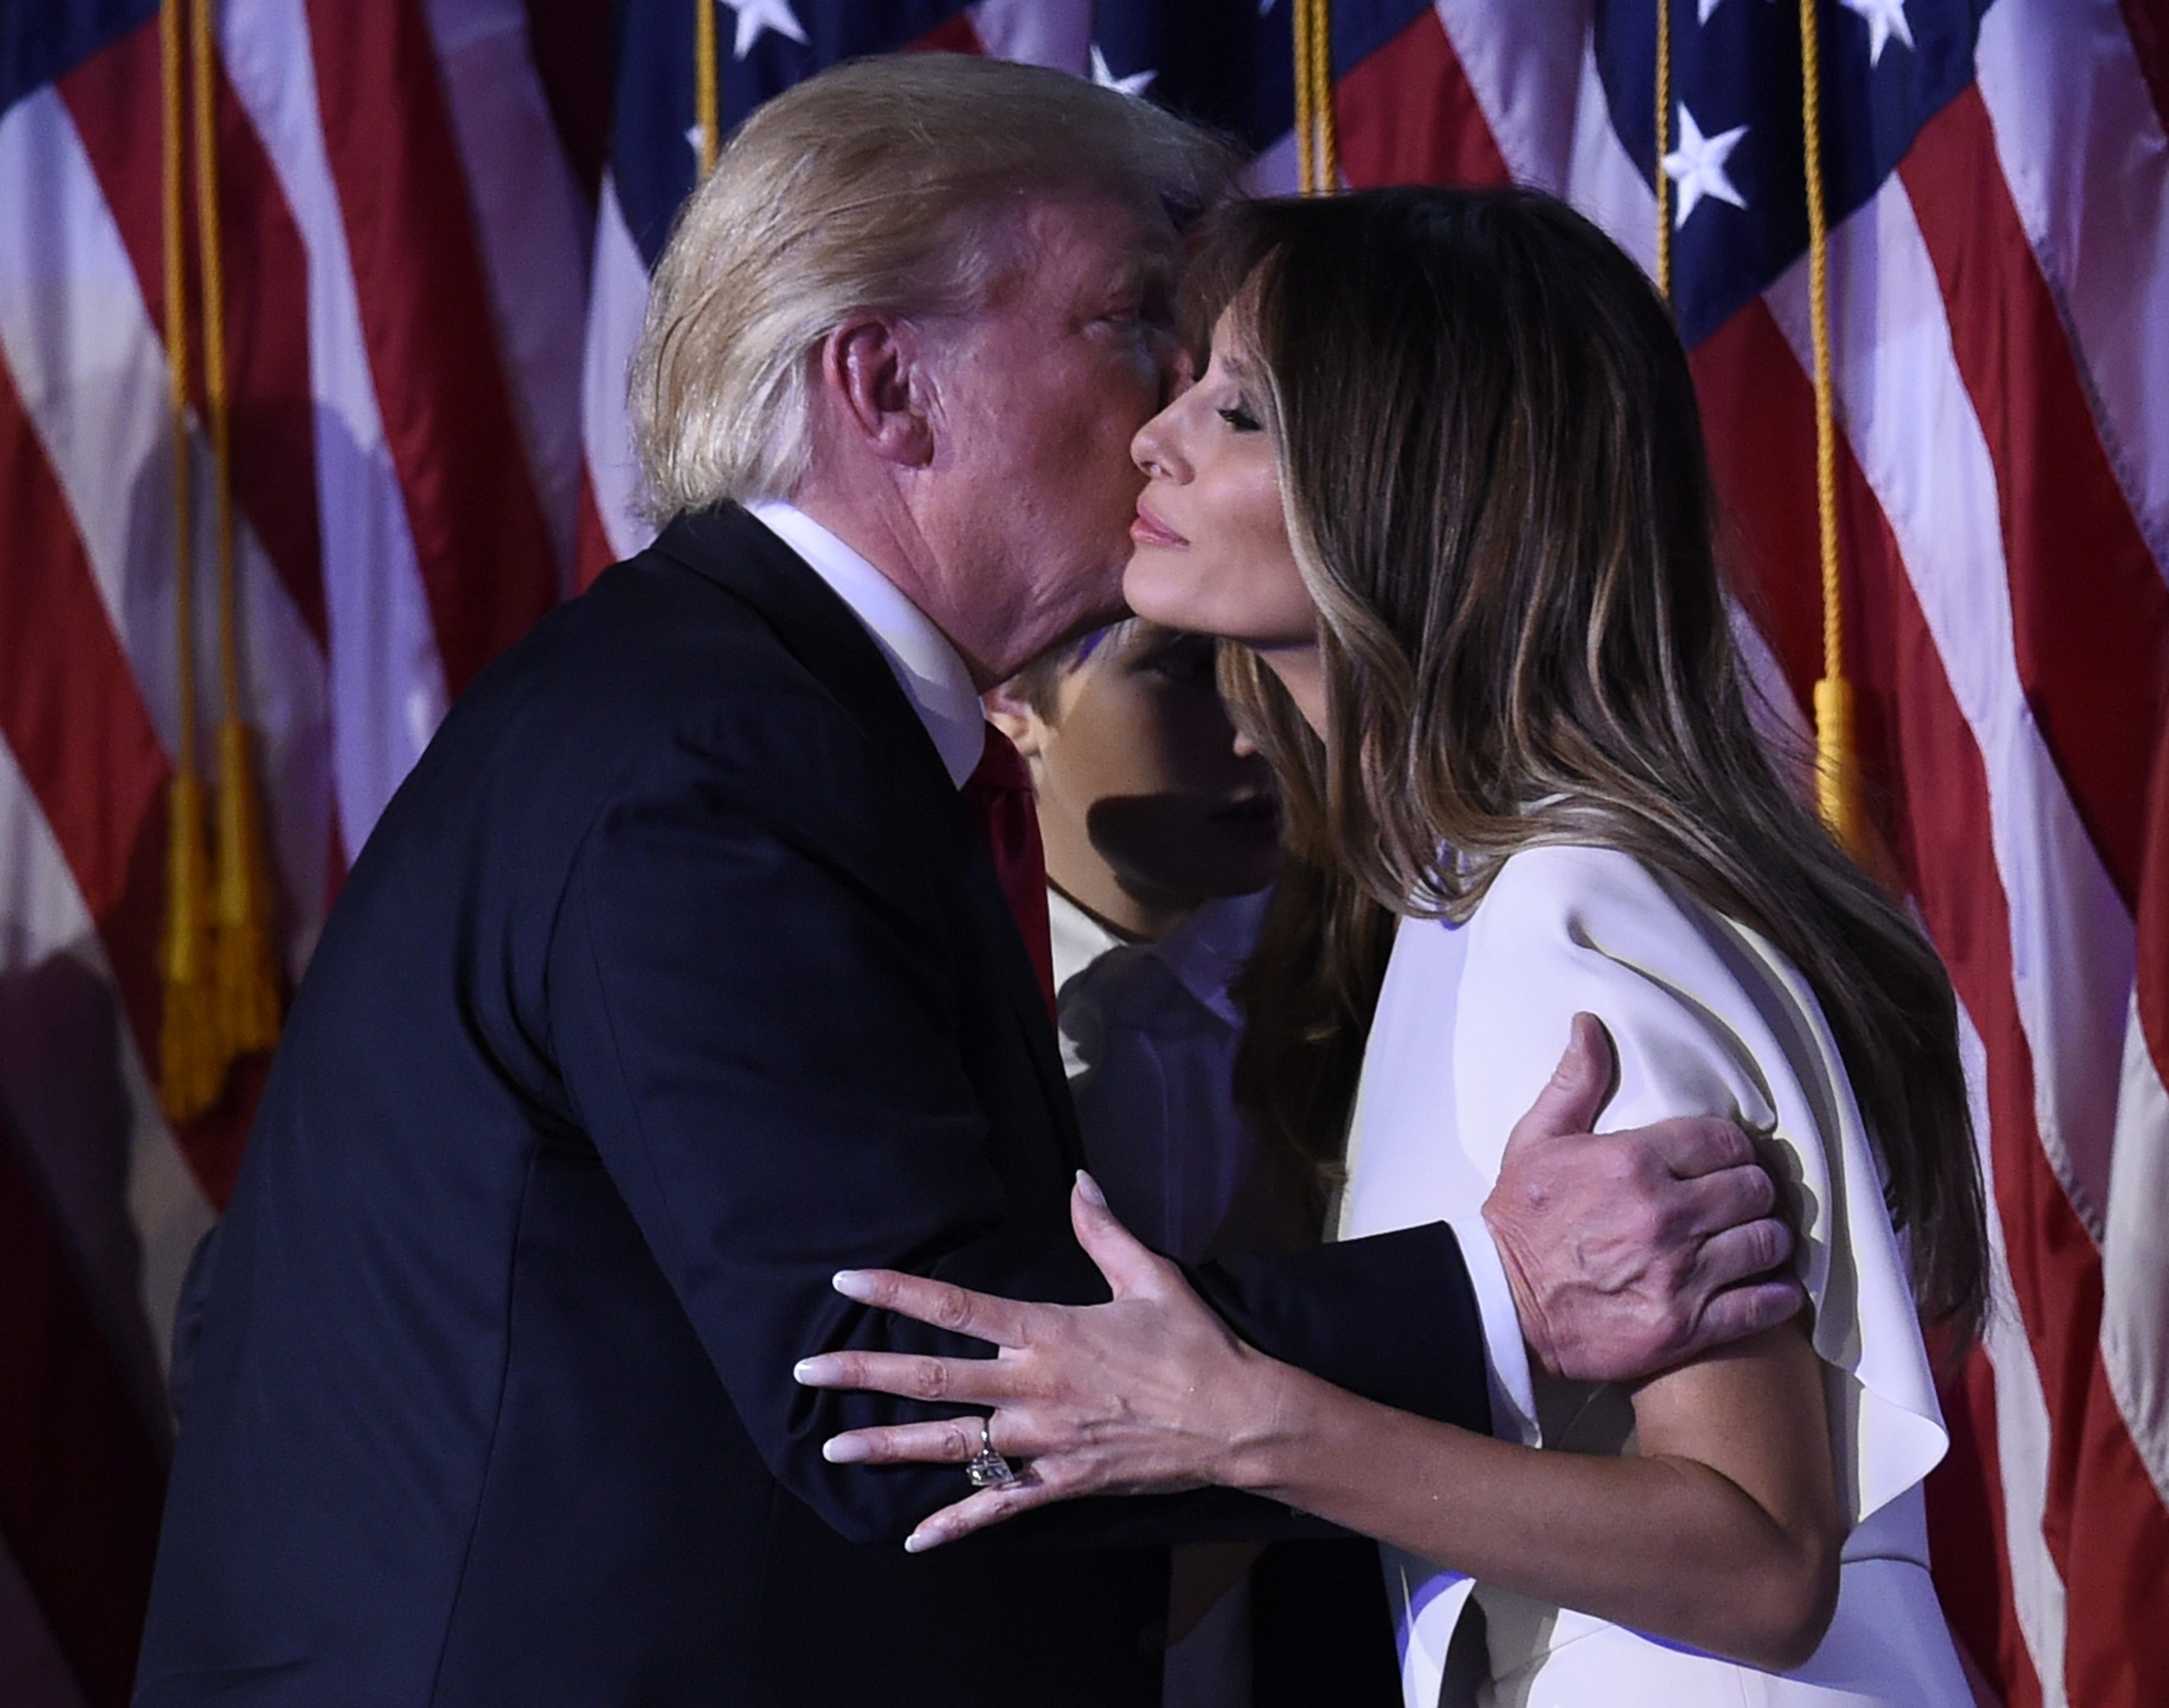 US President-elect Donald Trump greets wife Melania after speaking at the New York Hilton Midtown in New York on November 8, 2016. Trump stunned America and the world Wednesday, riding a wave of populist resentment to defeat Hillary Clinton in the race to become the 45th president of the United States. / AFP PHOTO / SAUL LOEB